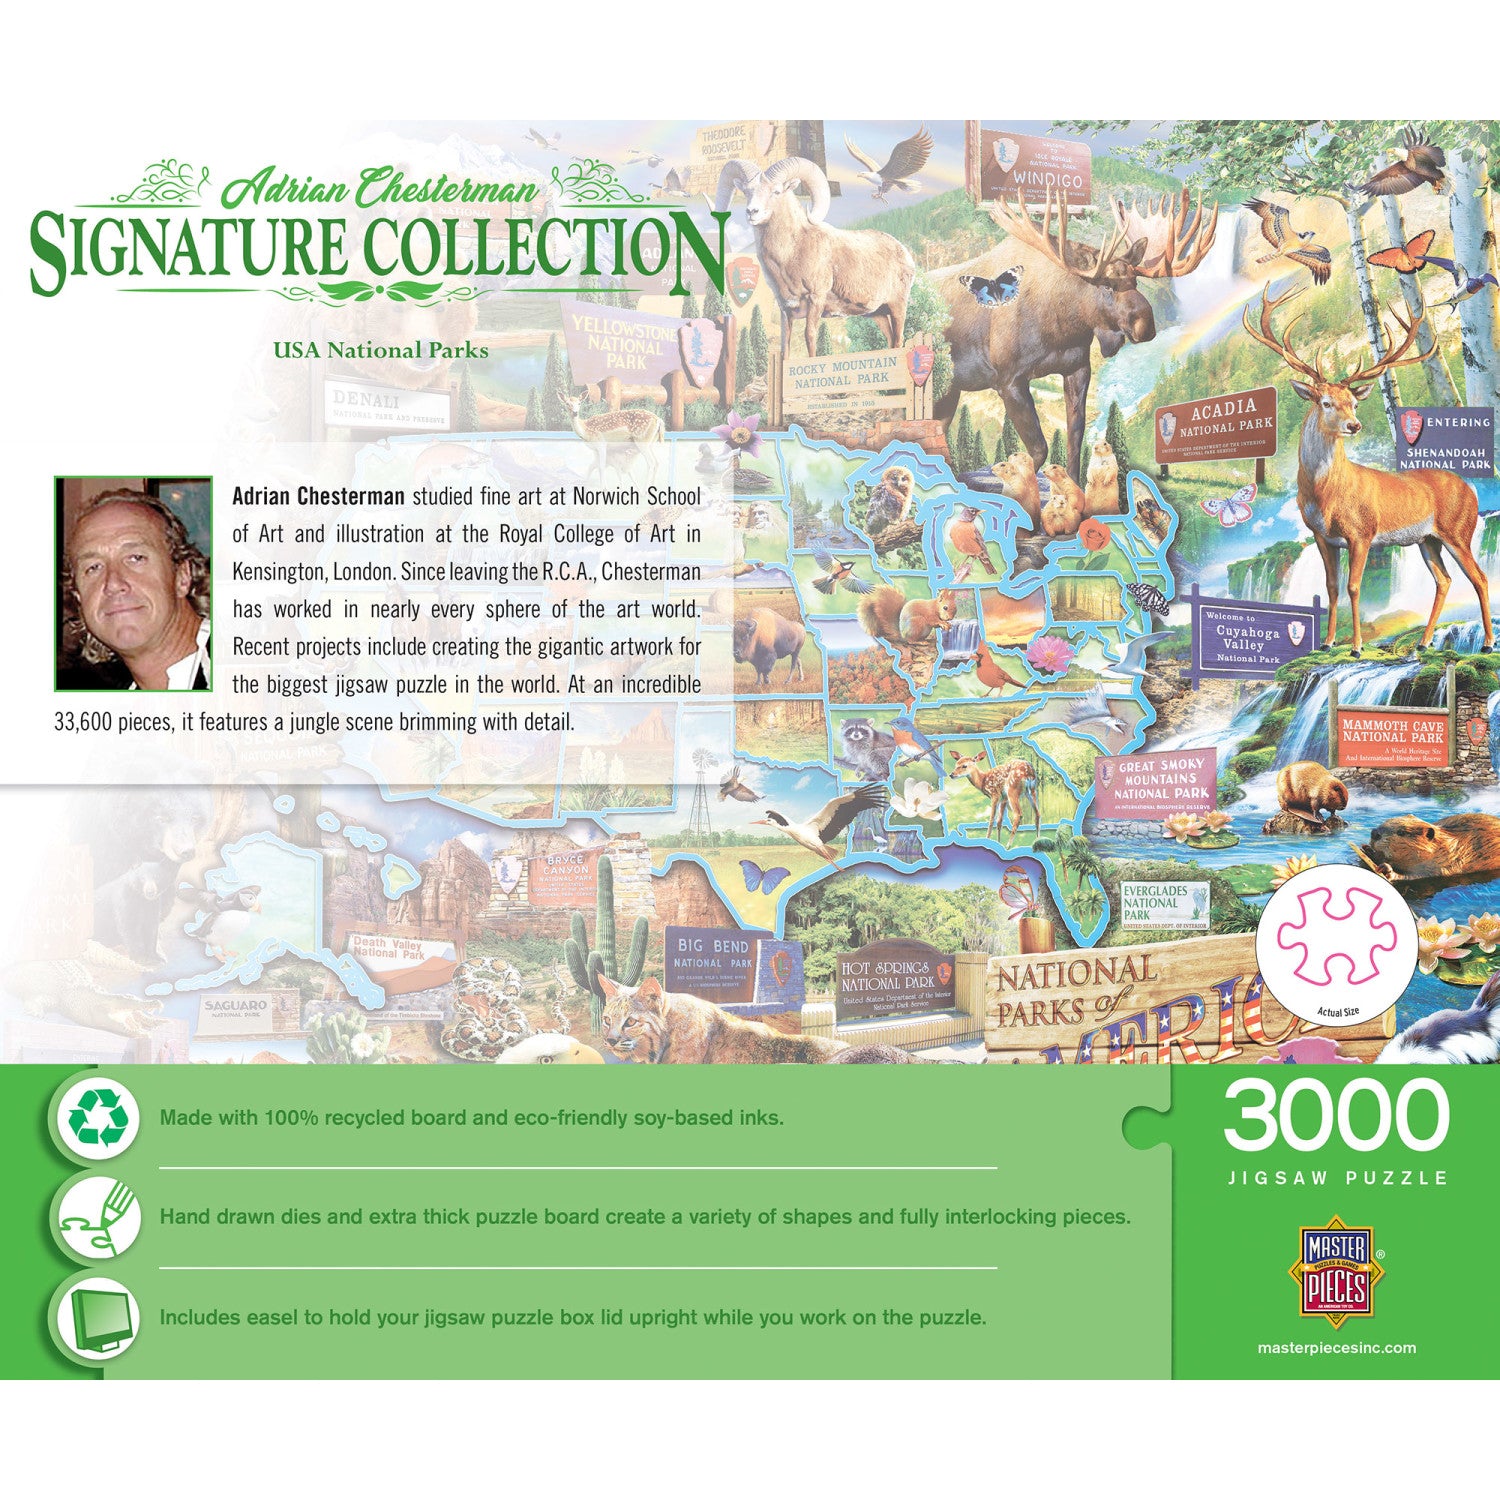 Signature Collection - USA National Parks 3000 Piece Jigsaw Puzzle - Flawed